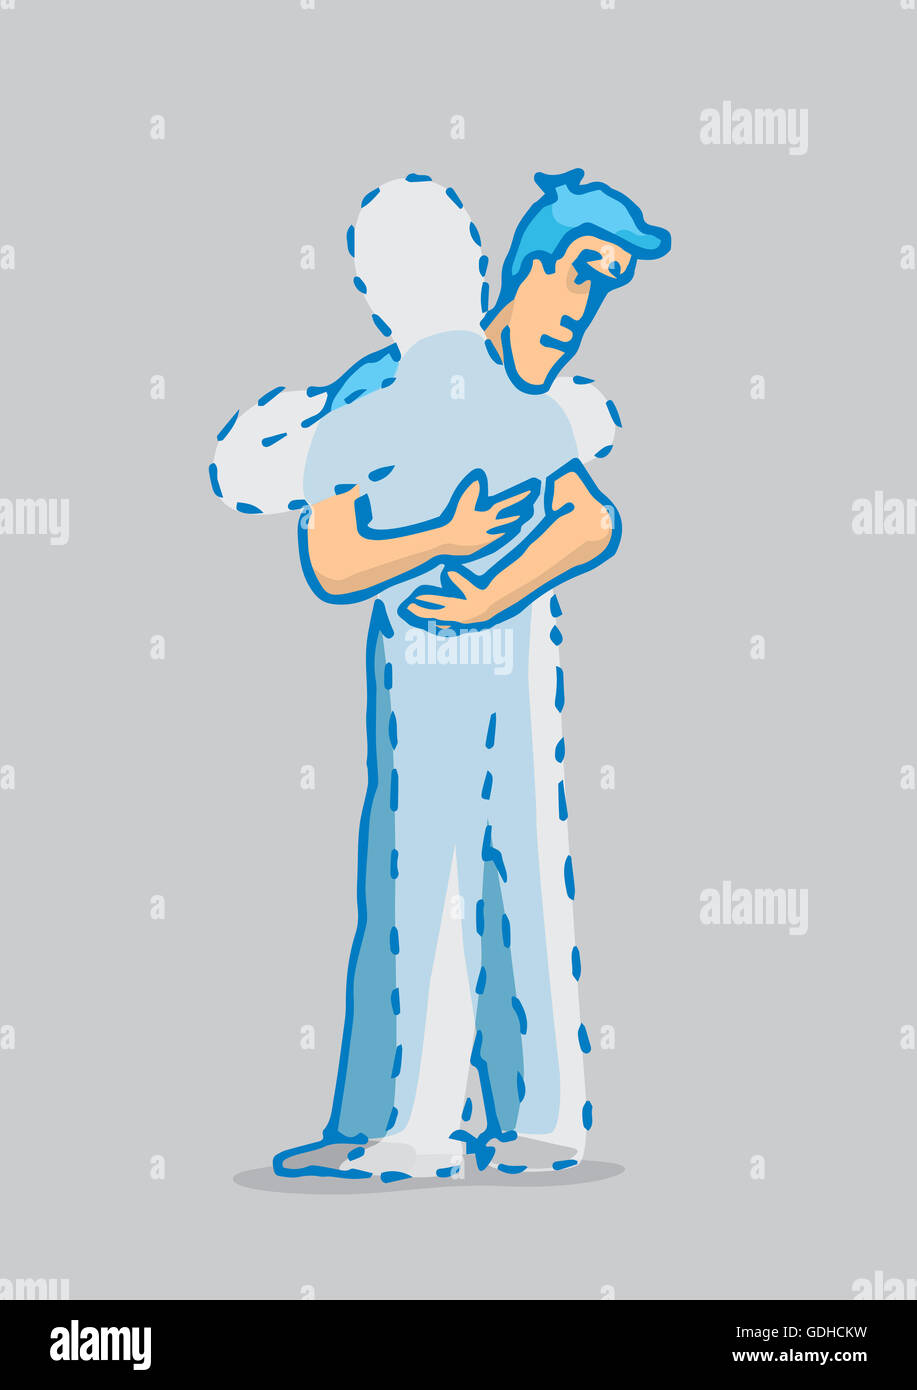 Cartoon illustration of man hugging a missing person or ghost Stock Photo